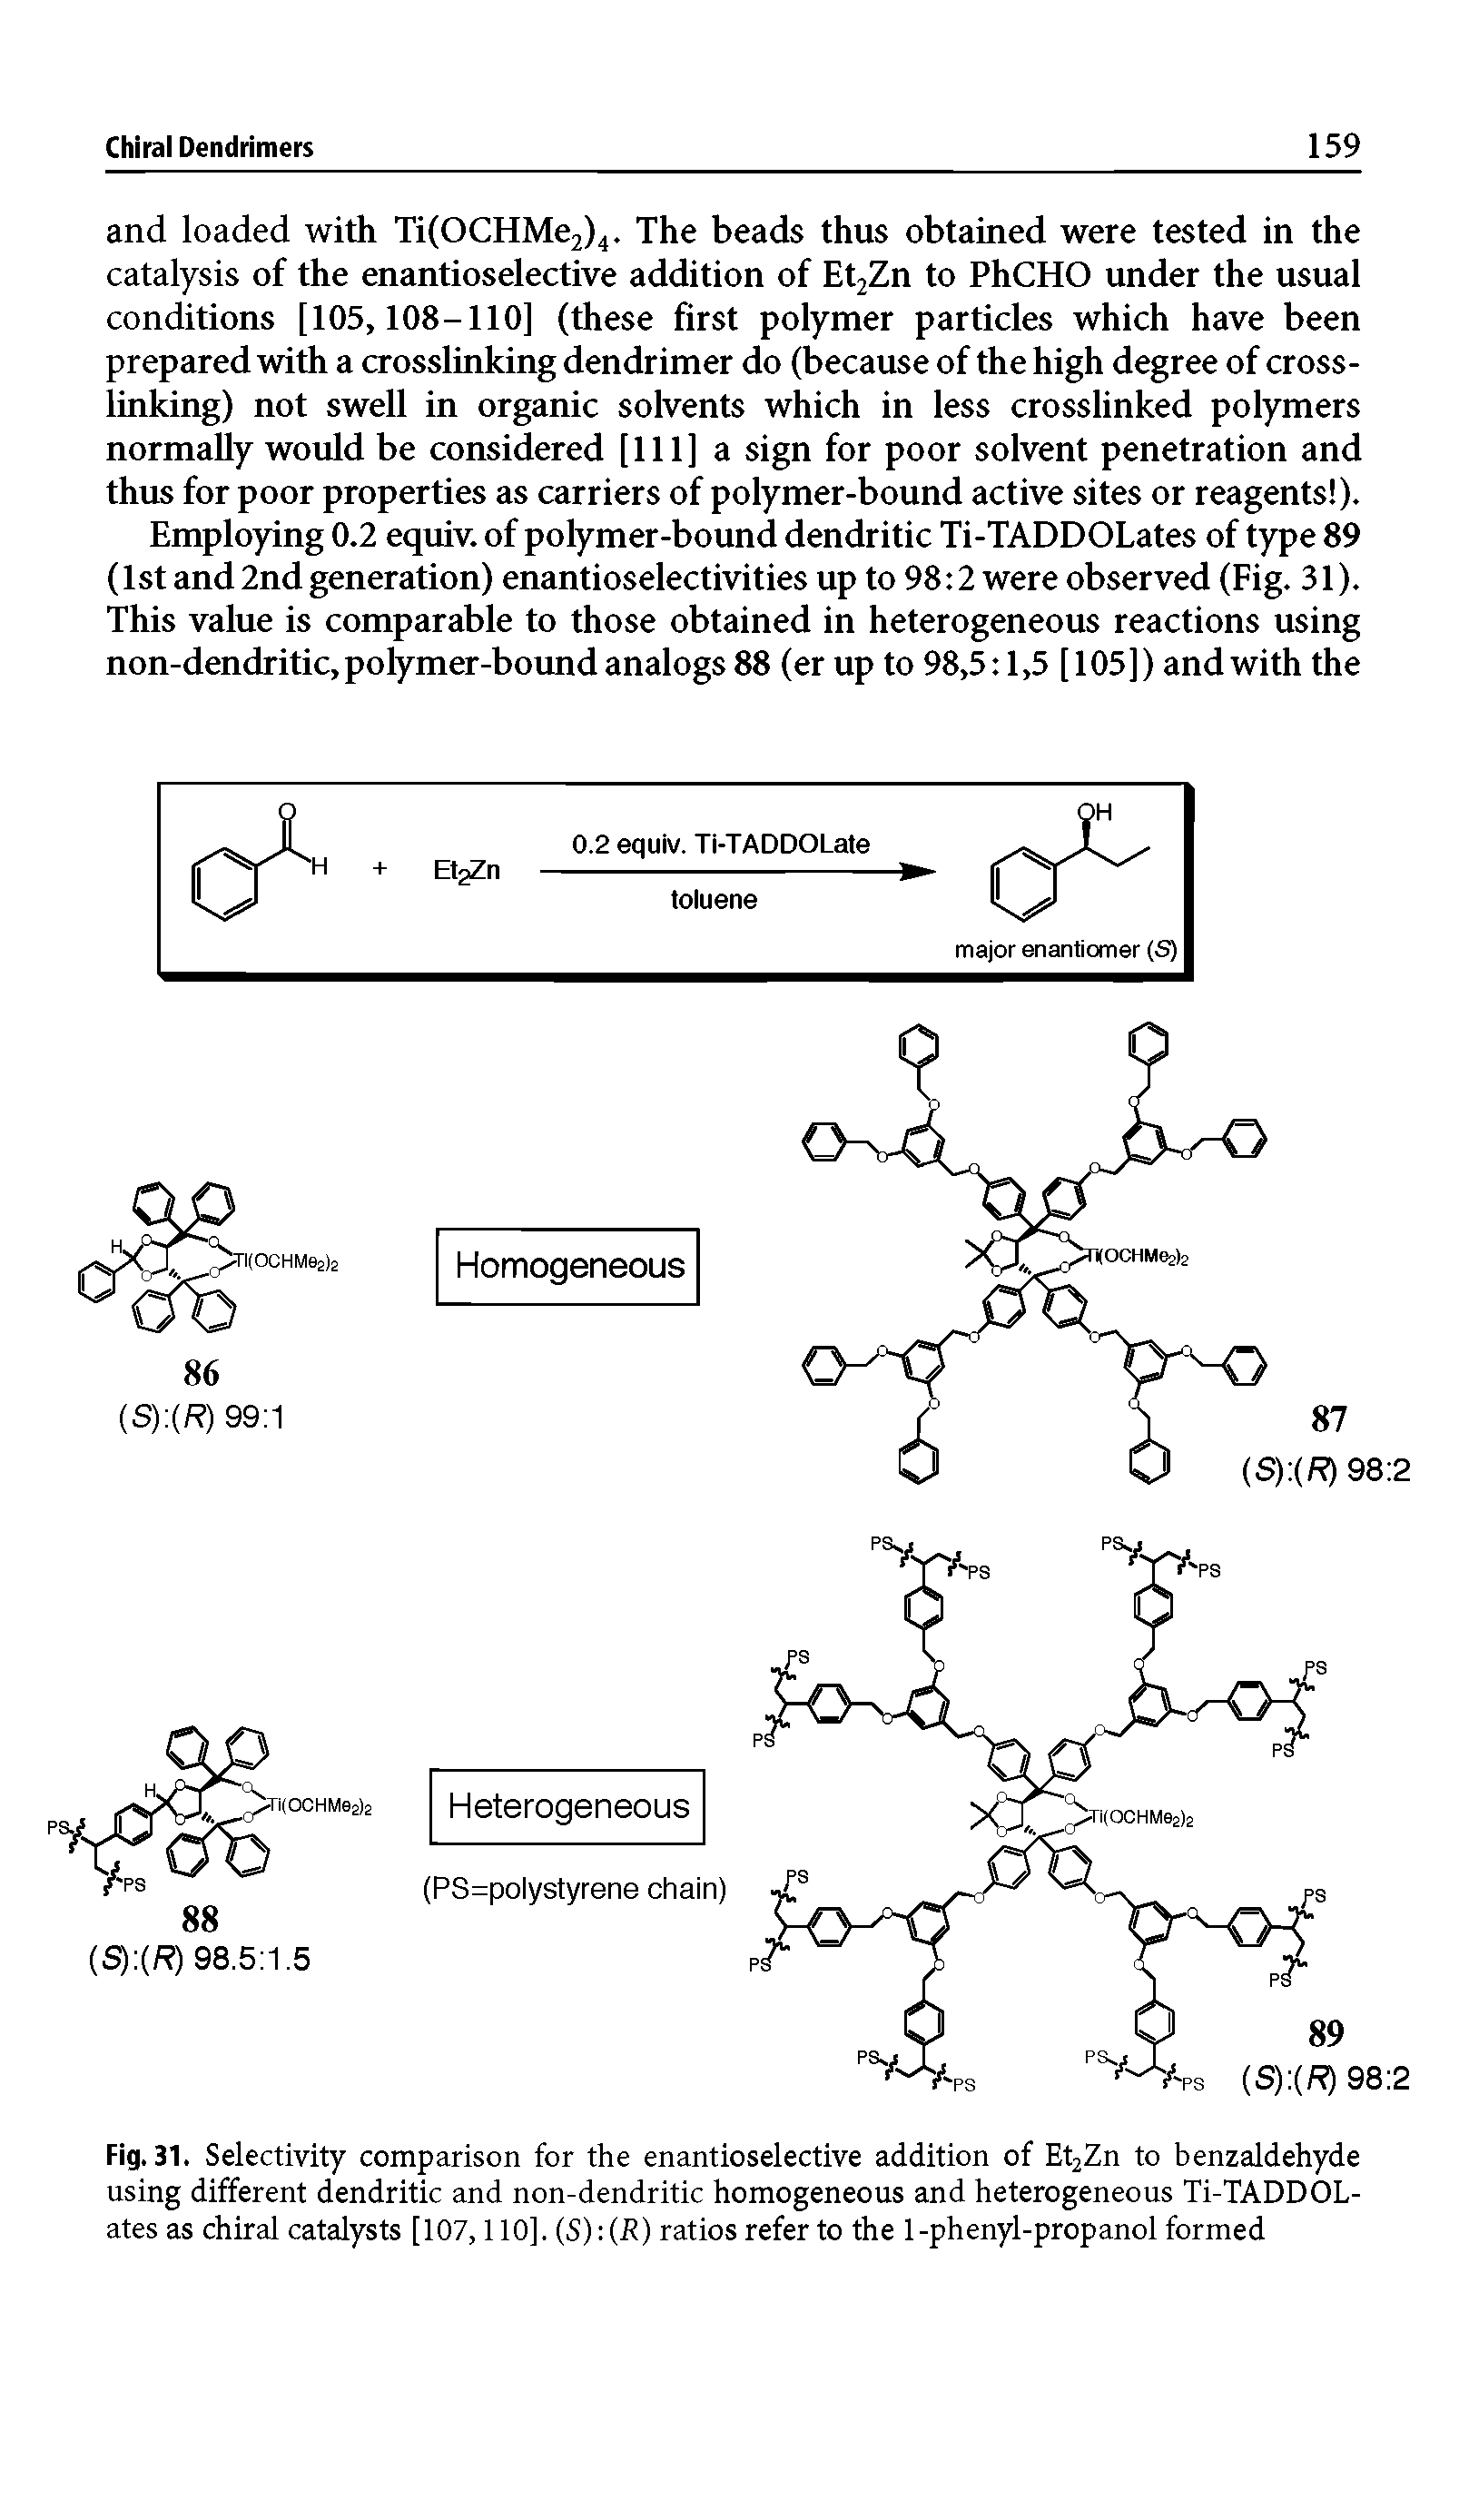 Fig. 31. Selectivity comparison for the enantioselective addition of Et2Zn to benzaldehyde using different dendritic and non-dendritic homogeneous and heterogeneous Ti-TADDOLates as chiral catalysts [107,110], (S)-.(R) ratios refer to the 1-phenyl-propanol formed...